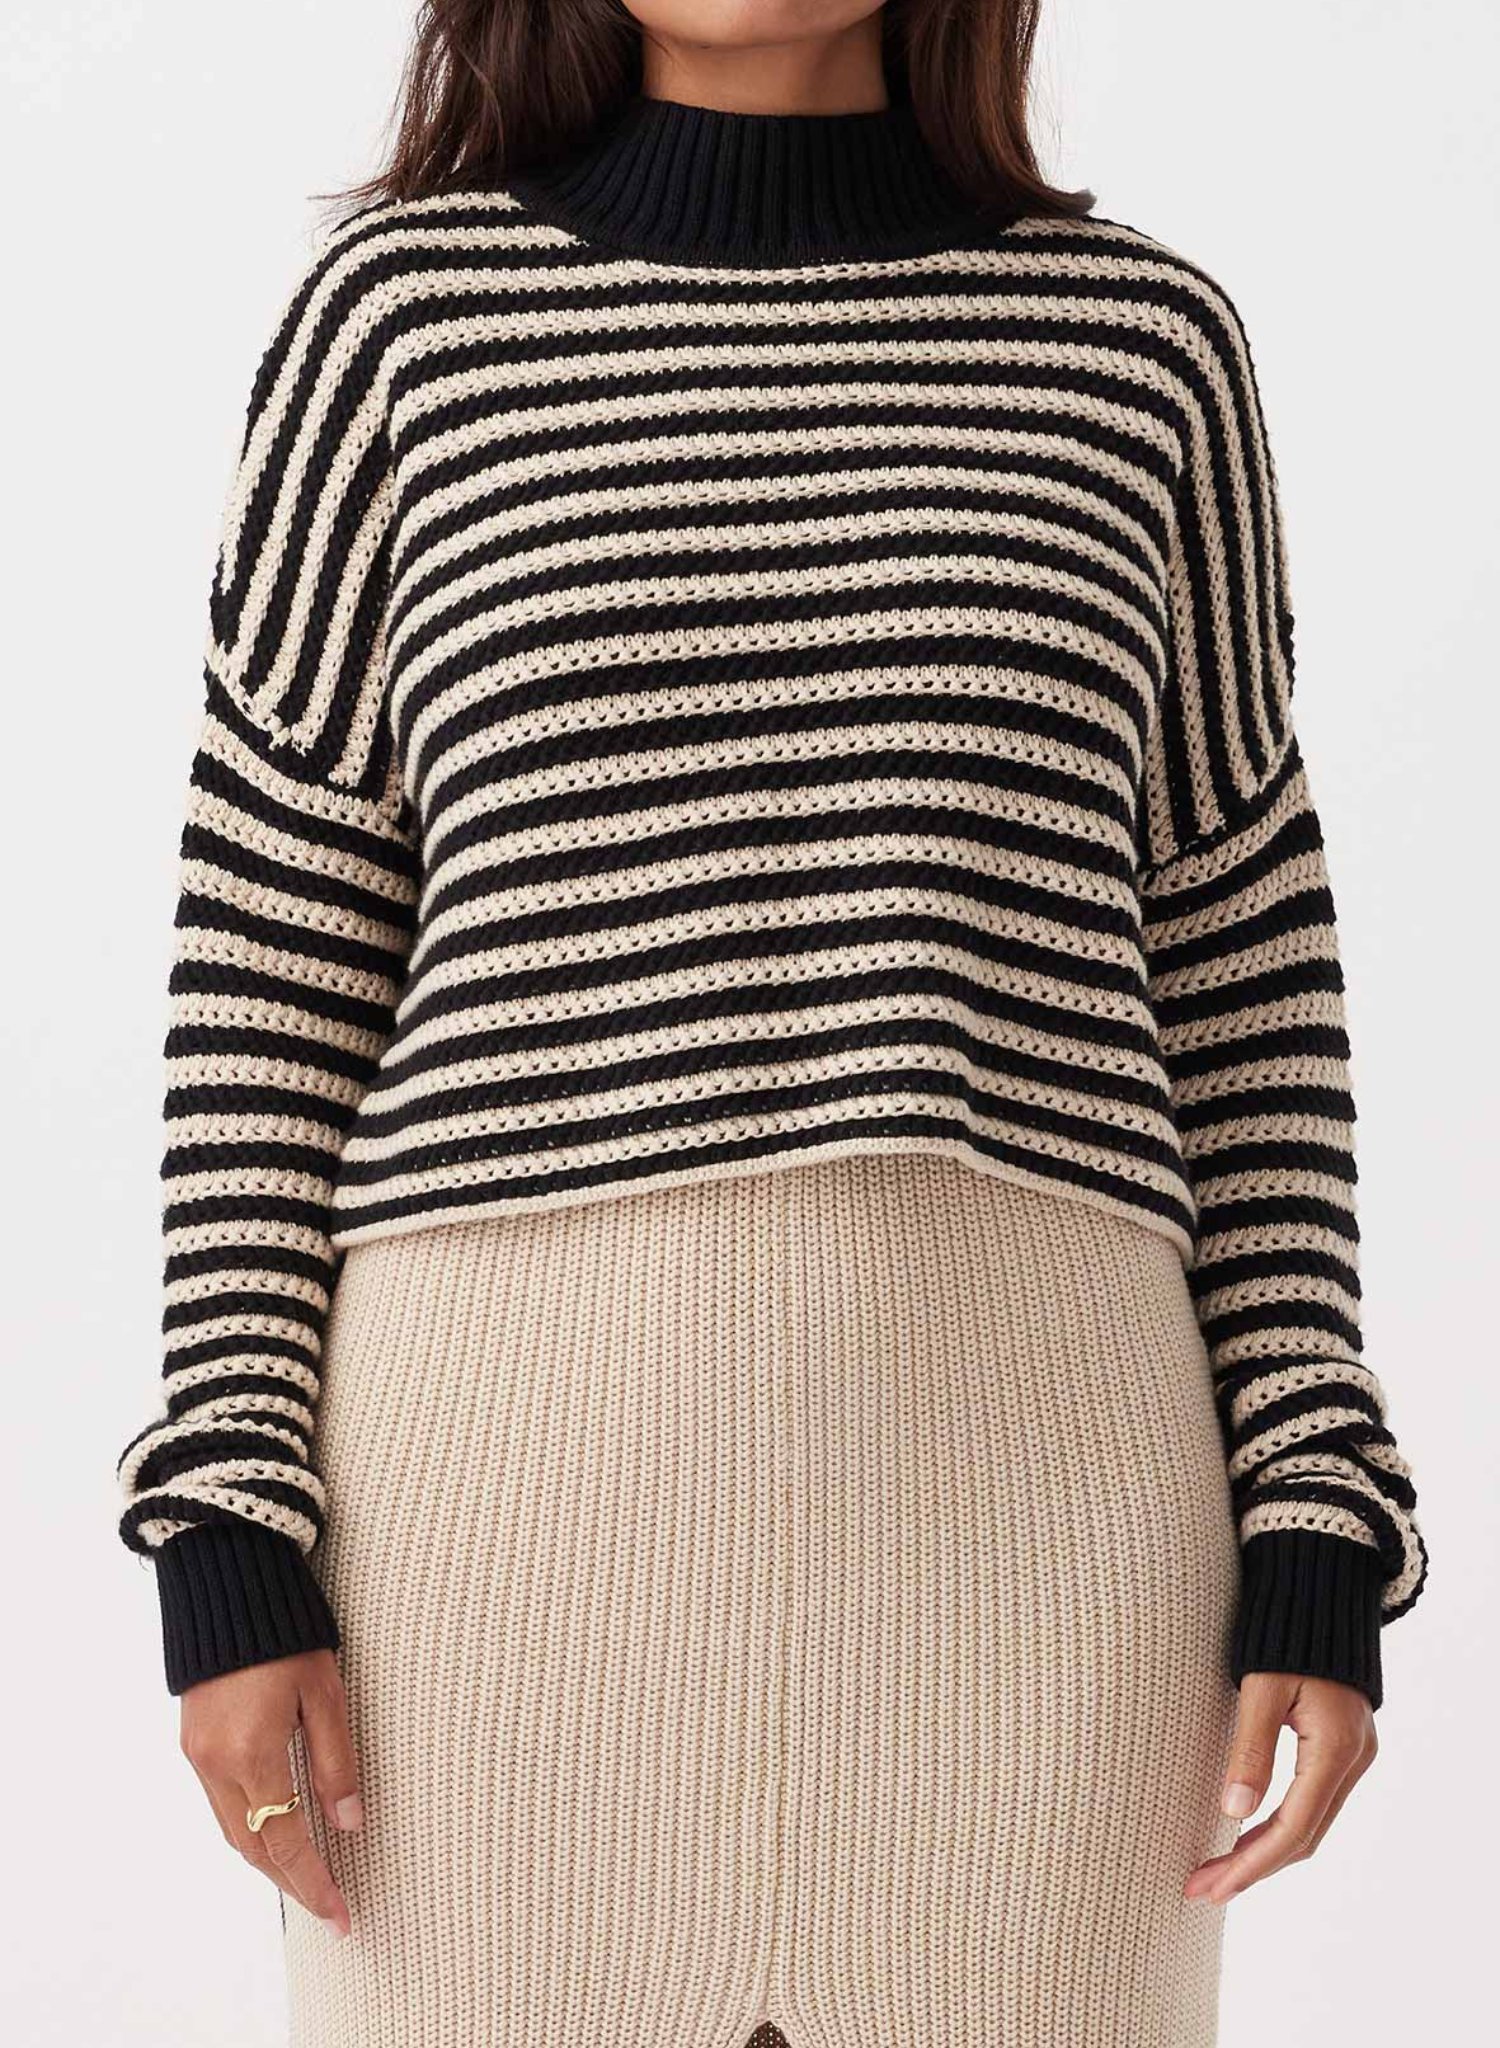 June Cropped Sweater - Sand & Black